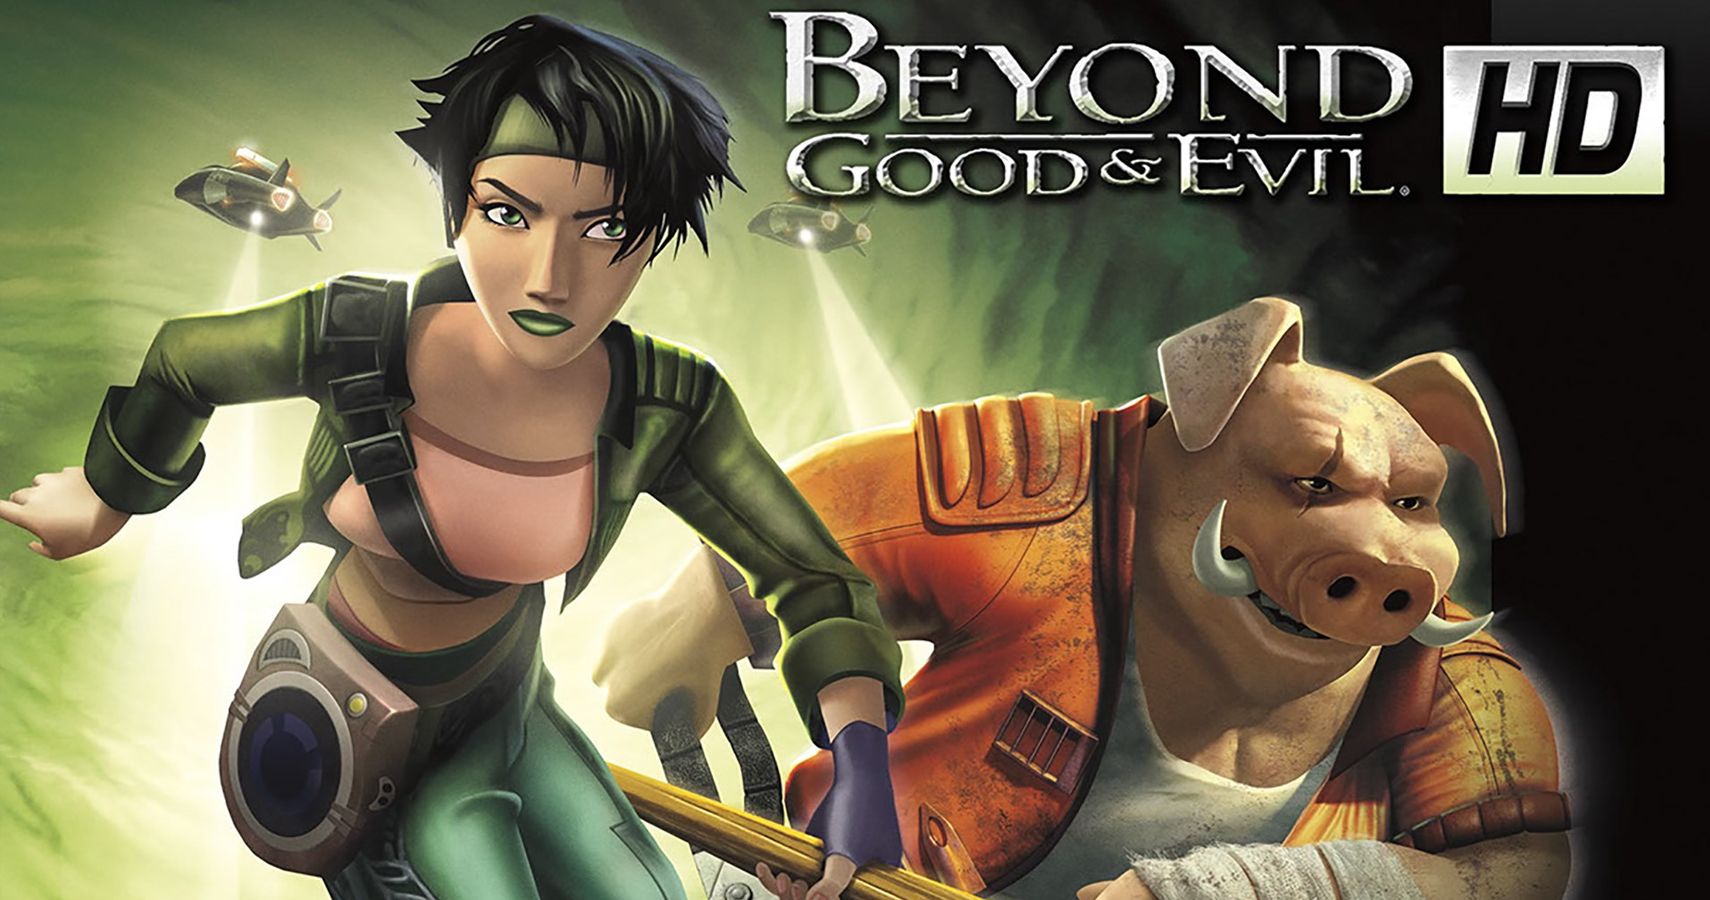 Beyond Good and Evil Gamecube Game